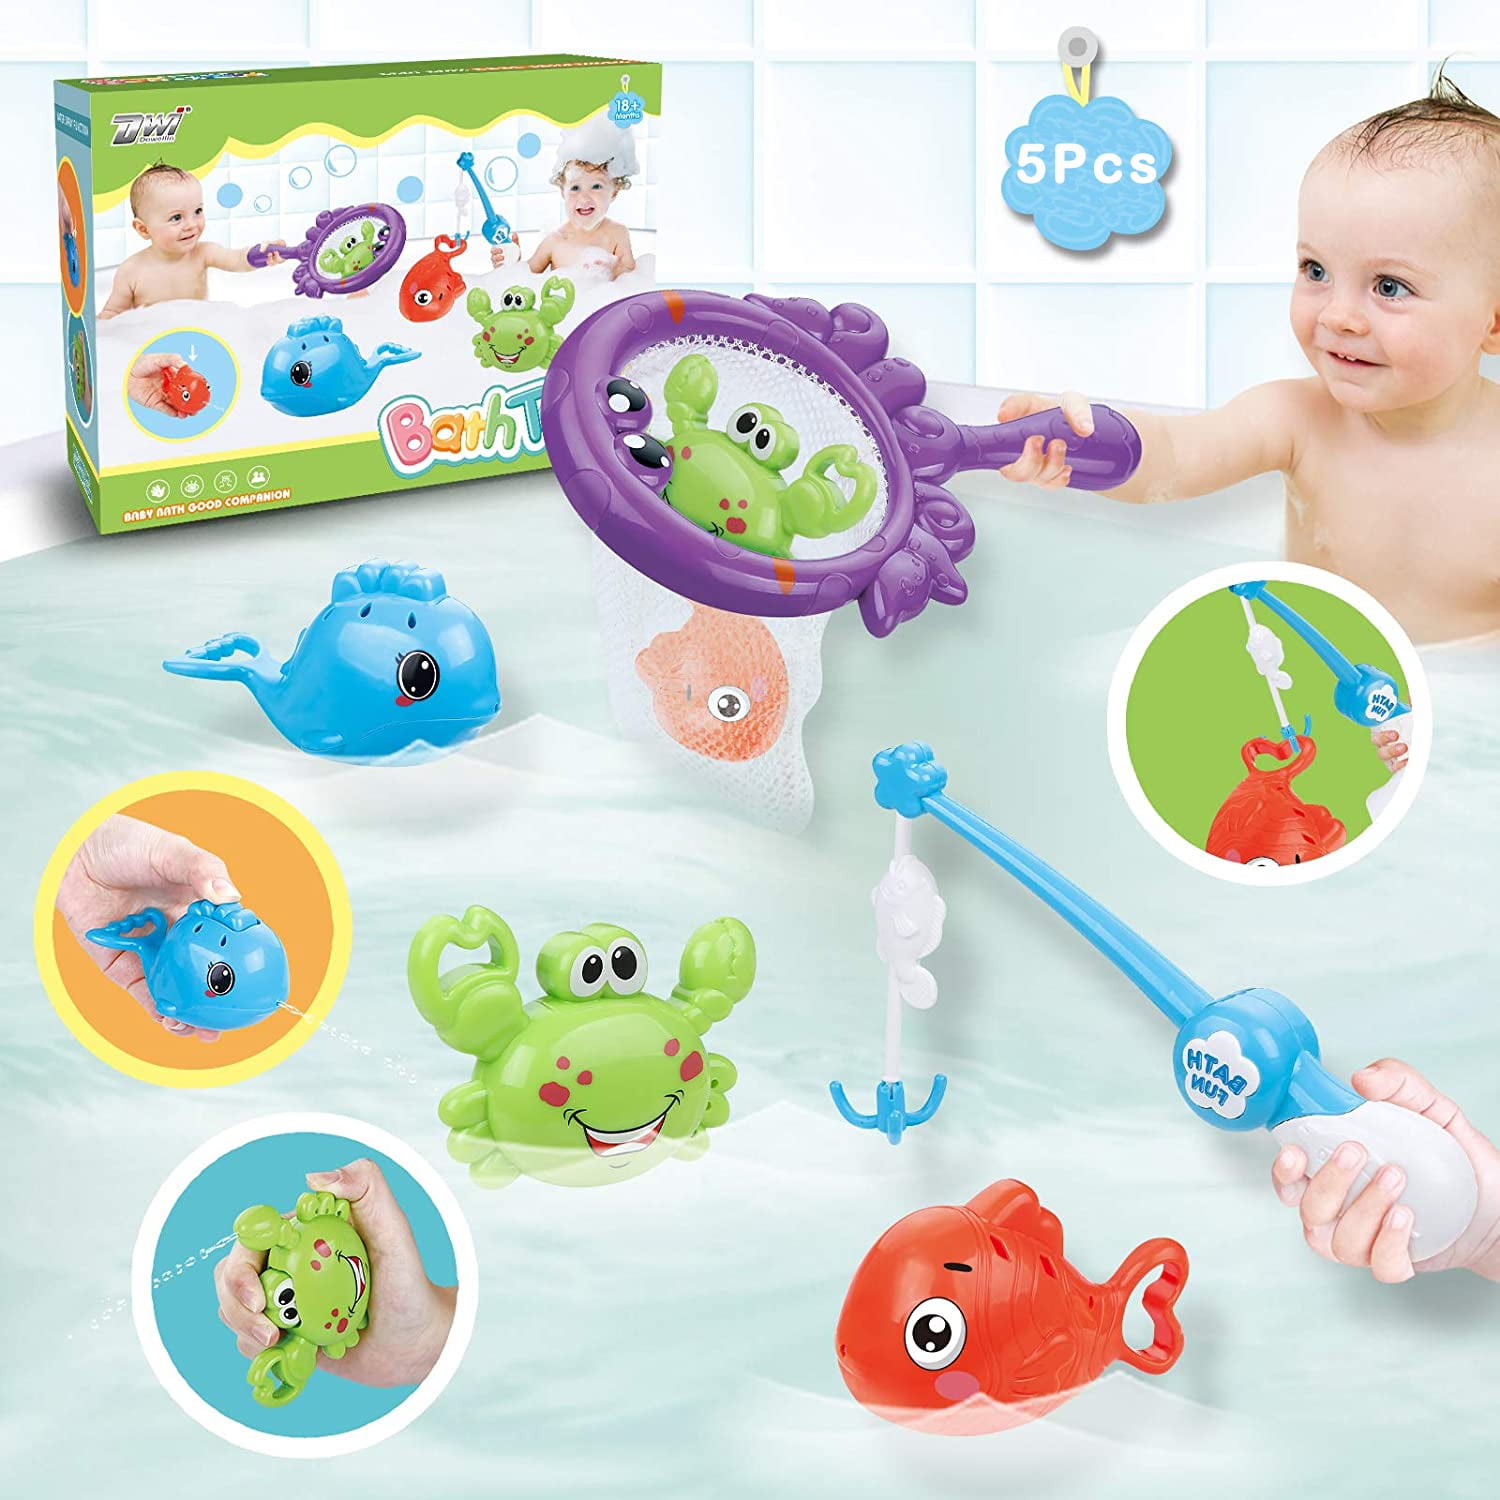 53 PCS Plastic Floating Fishing Bath Toys Set for Kids Bath Time Magnetic Fishing Toy for Toddlers Fishing Game for Kids Learning and Education Toys for Children 